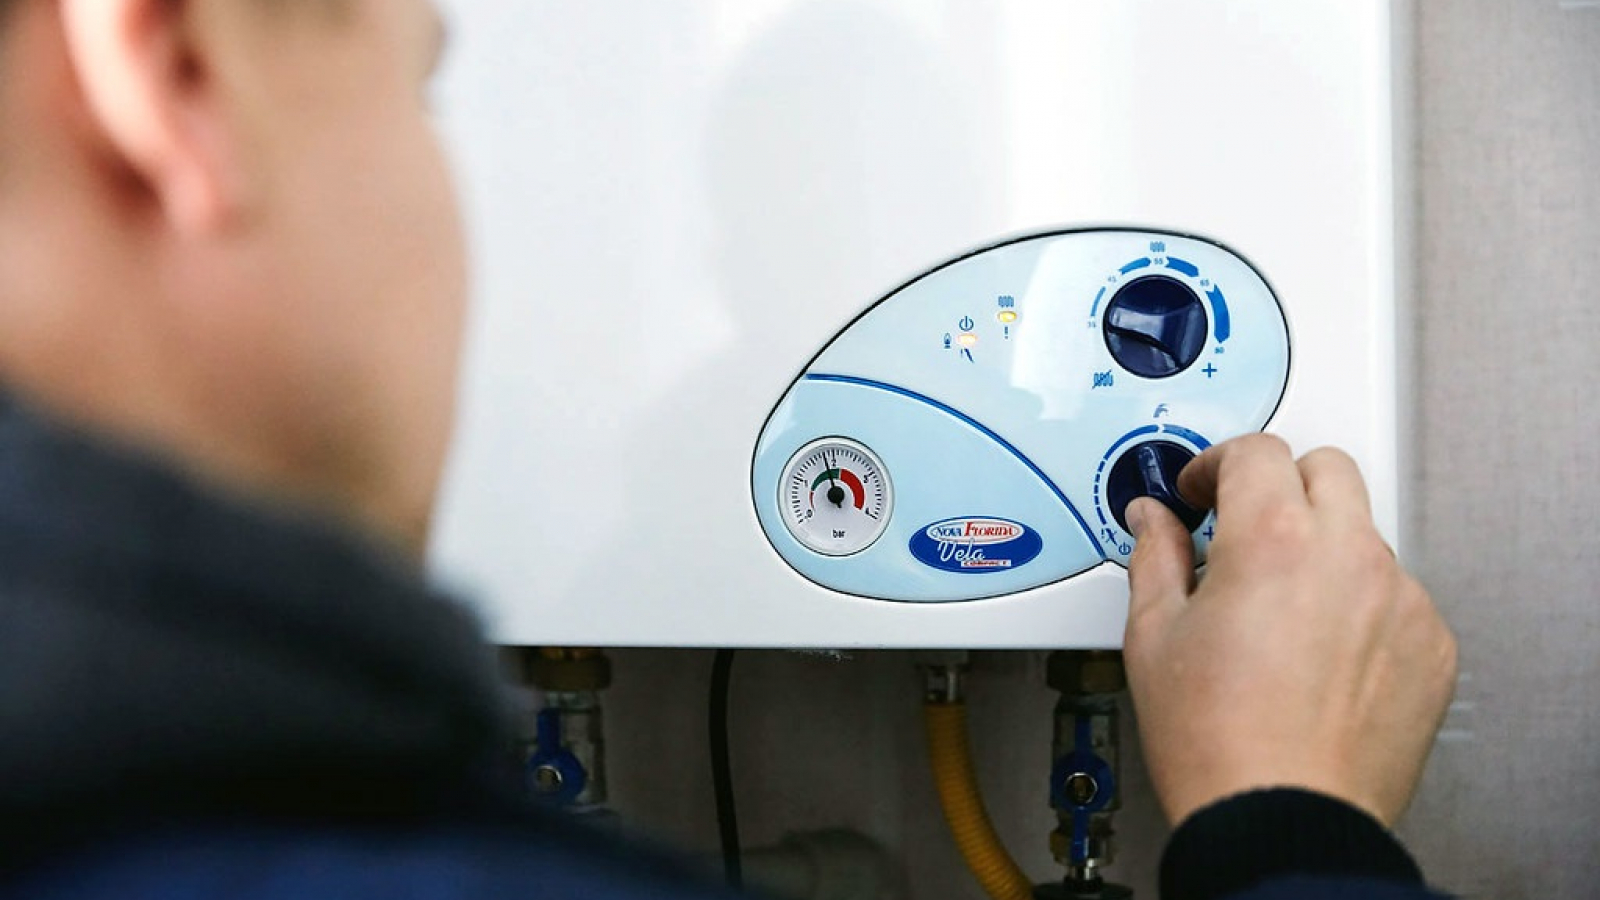 EU4Energy: New project in Moldova to support smart meter roll-out